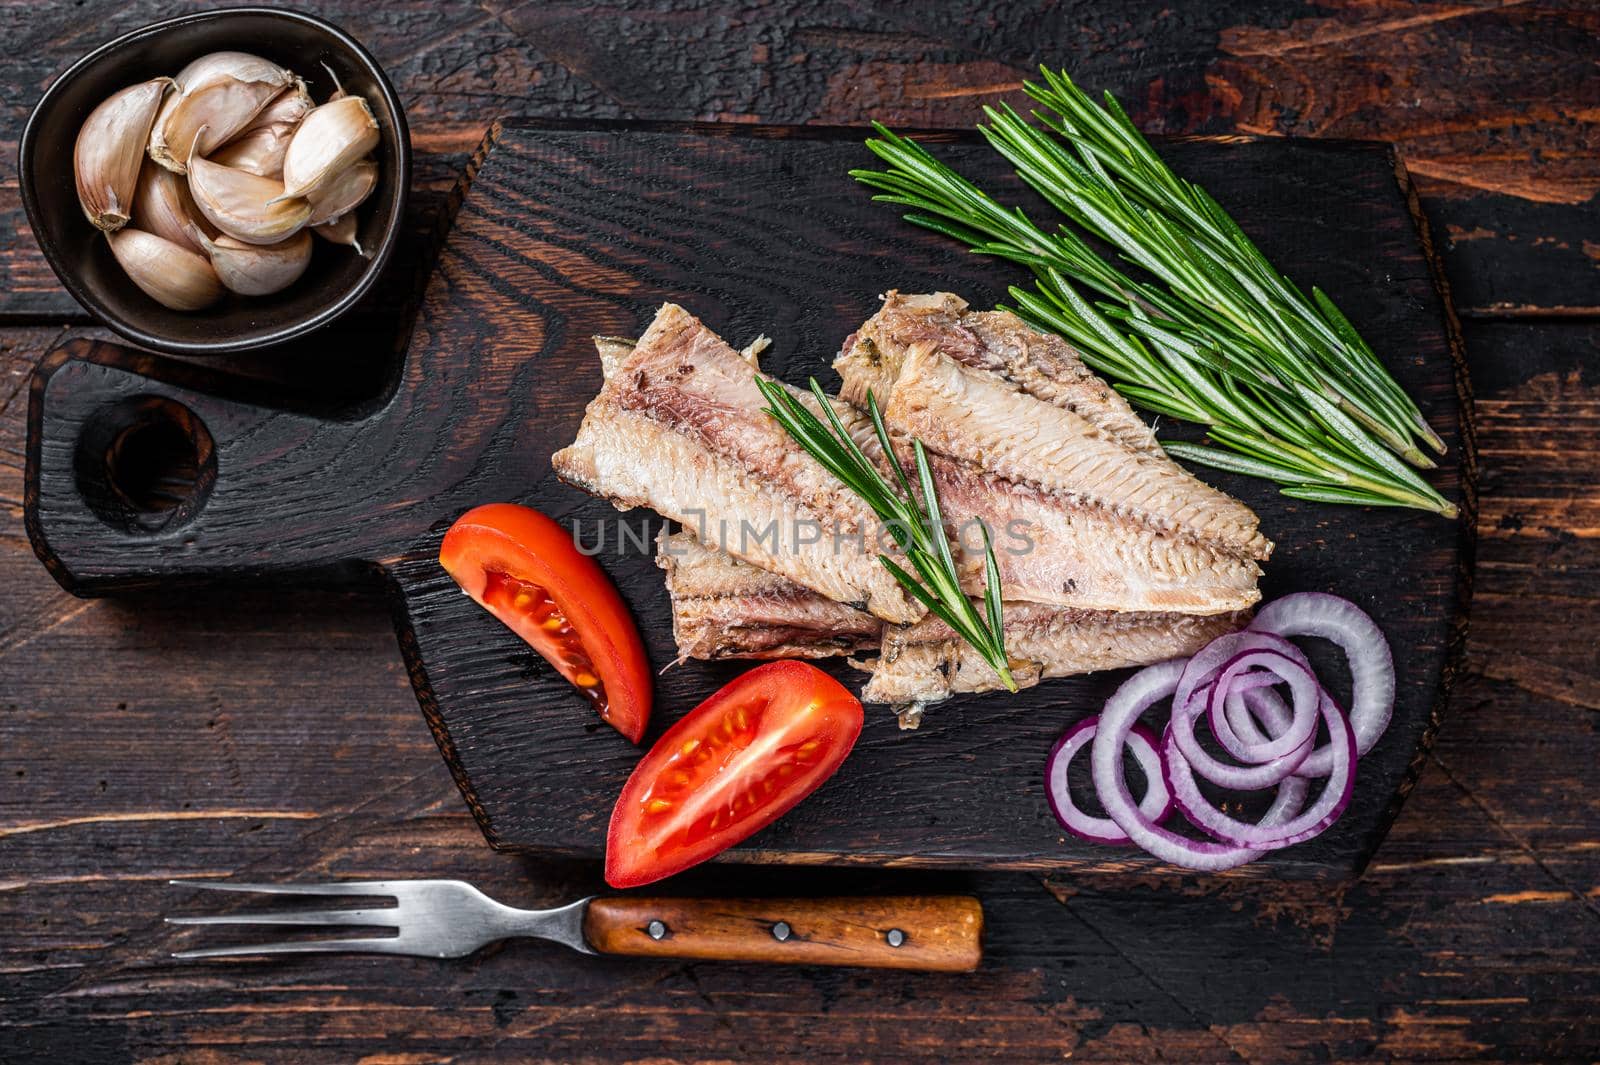 Smoked Sardine fish fillet on wooden board with herbs. Dark wooden background. Top view by Composter